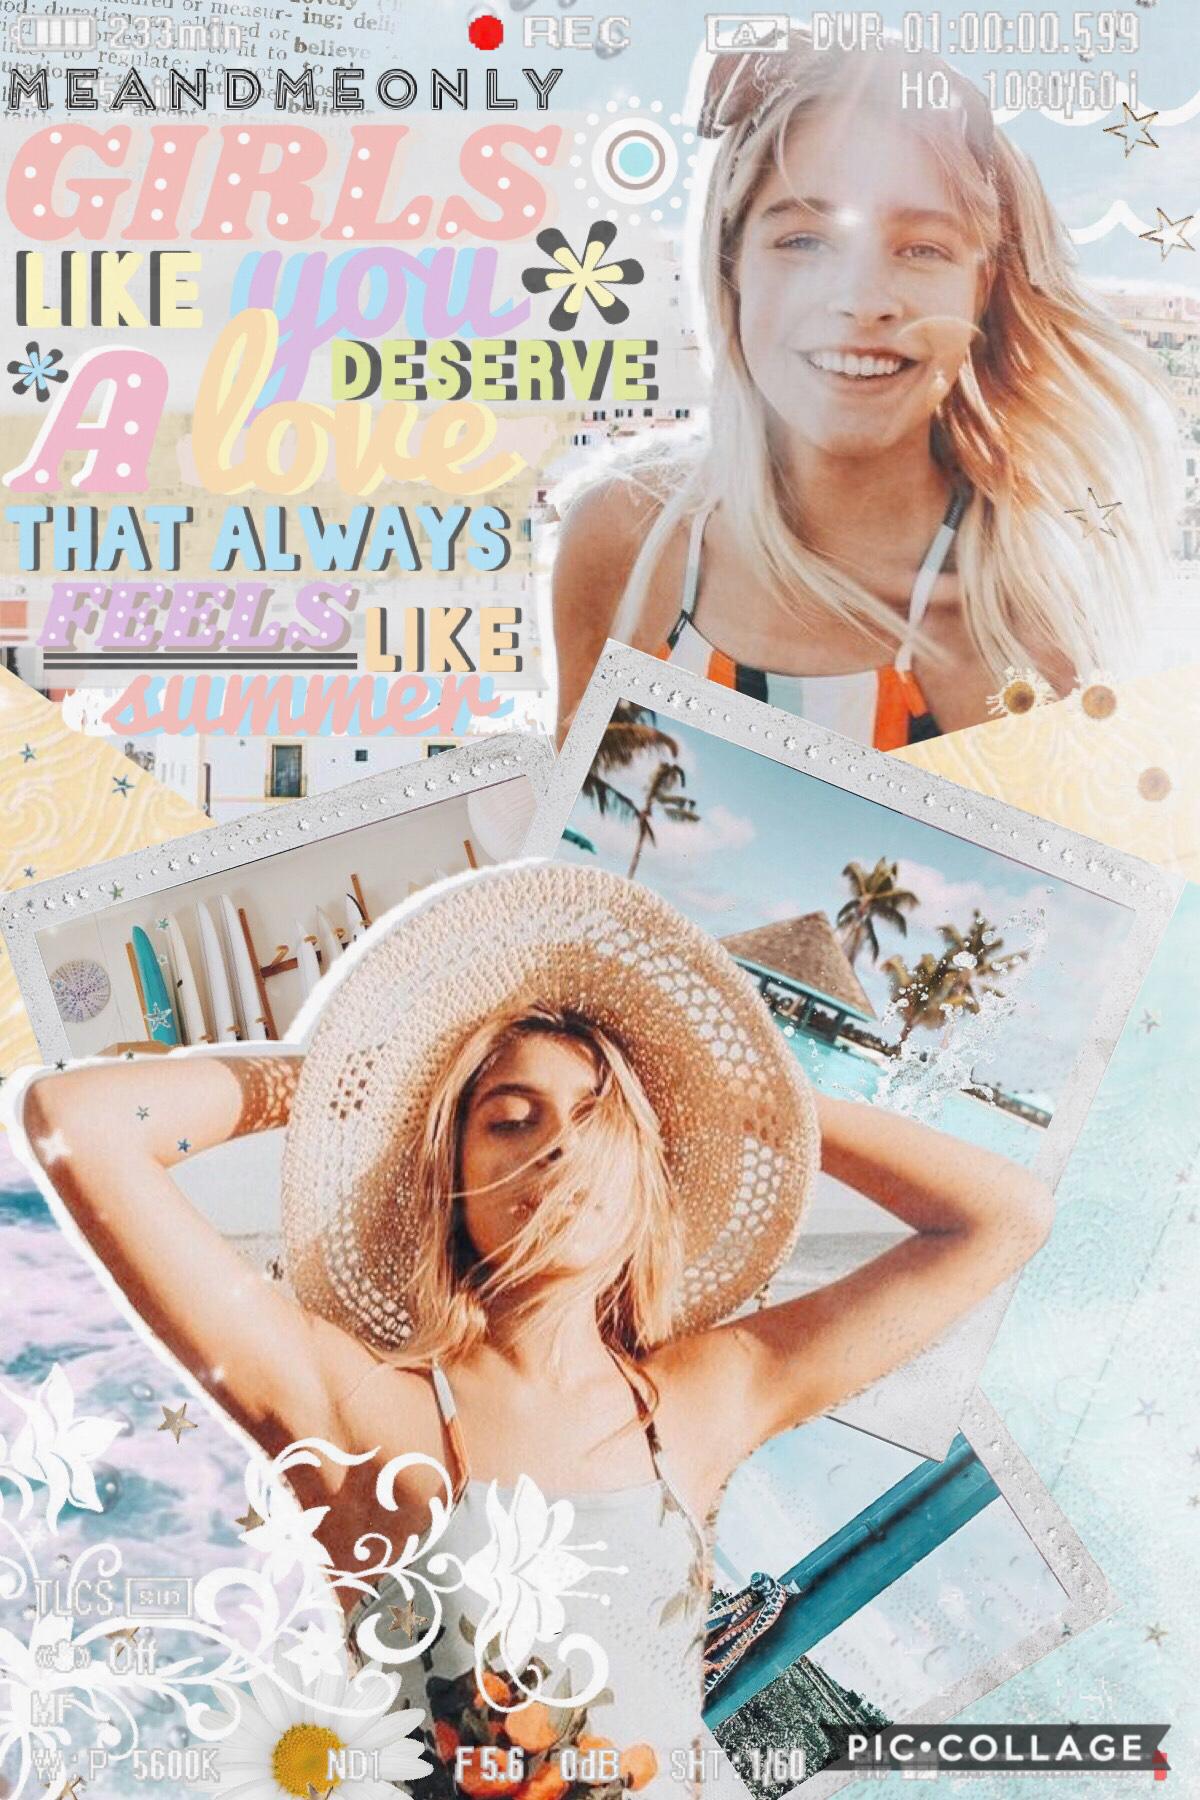 thank you so much for the 2 features!!💛🌼and this might be my last summer collage for a while cause tomorrow is the last day of summer :((((
QOTD: fav month?🌻🌿
AOTD: SUMMERRR🌞 or SPRINGG🌼🌸
